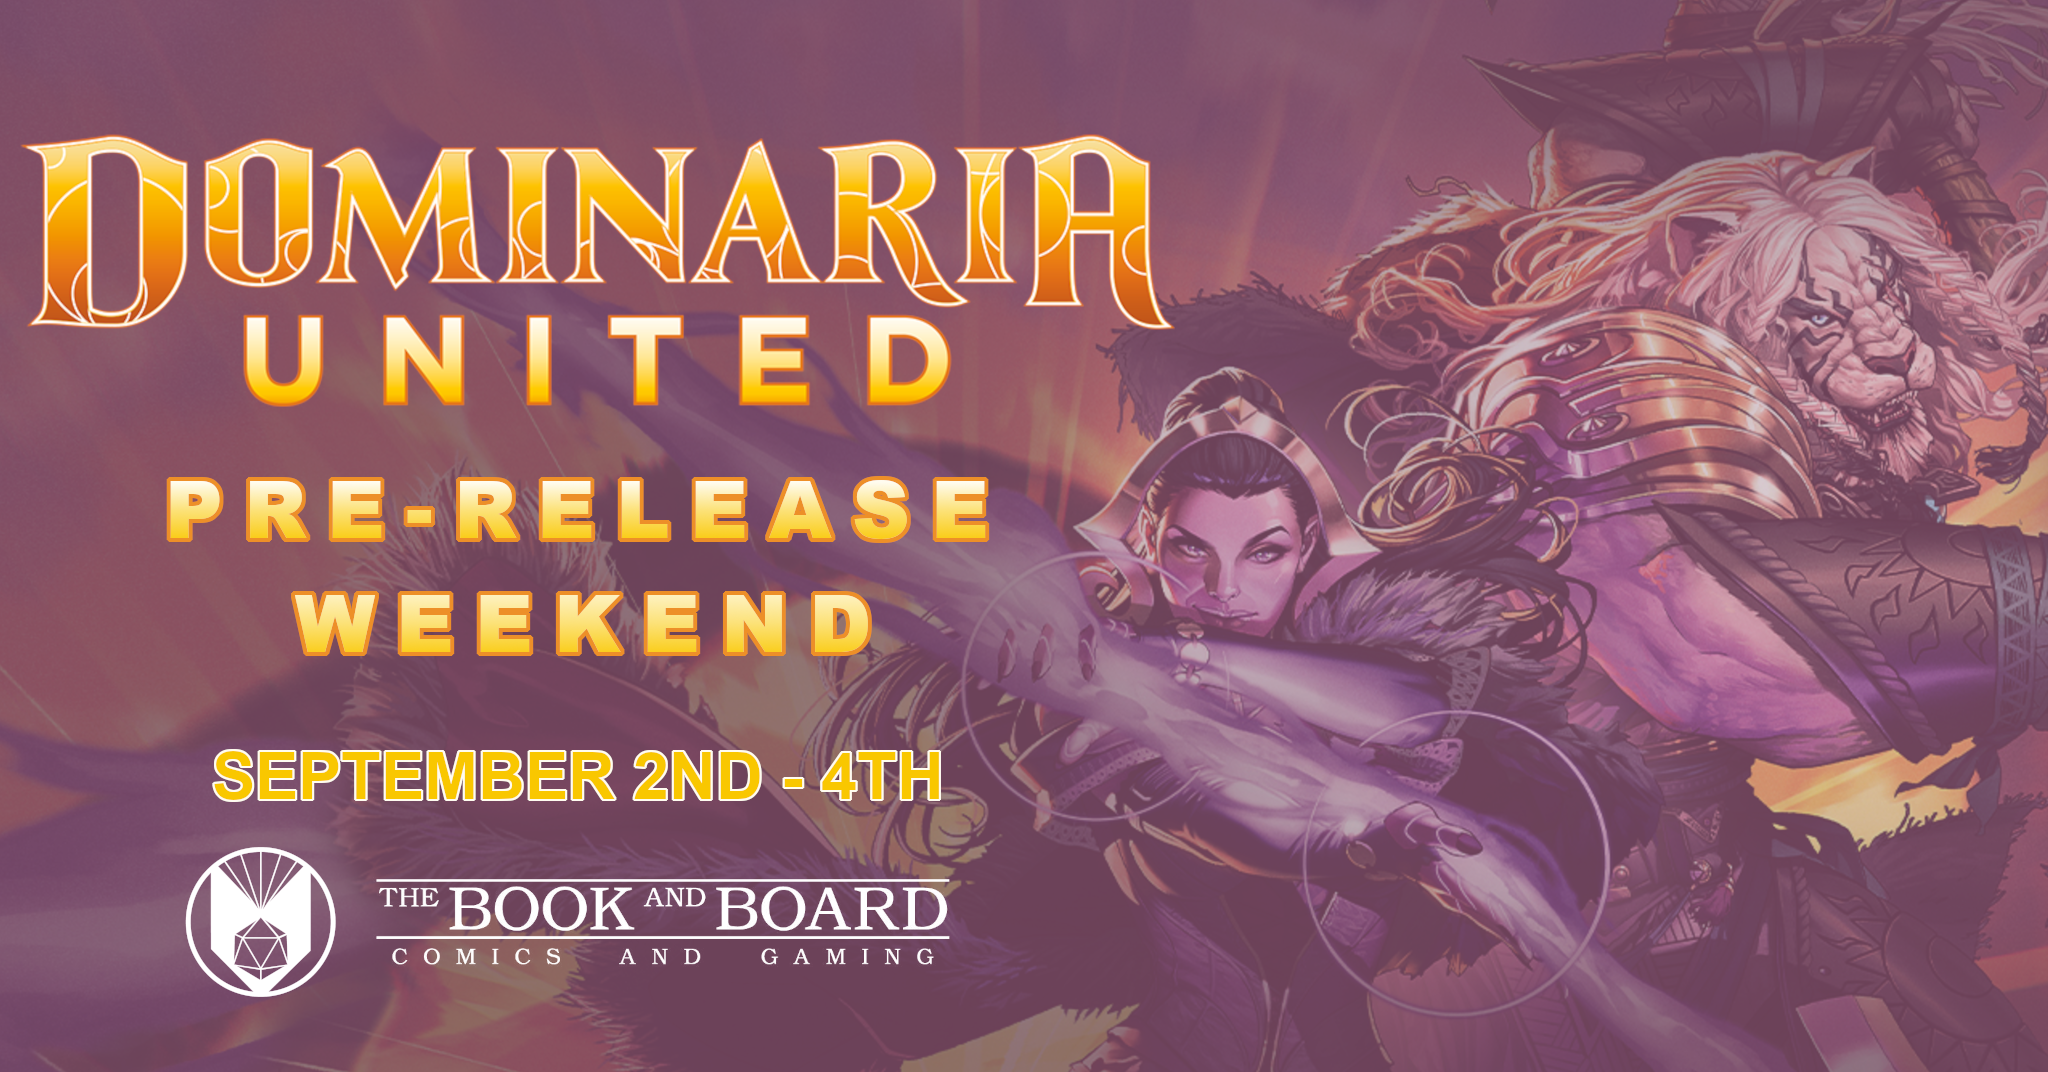 Dominaria United Pre-Release Weekend: Sept. 2nd - 4th